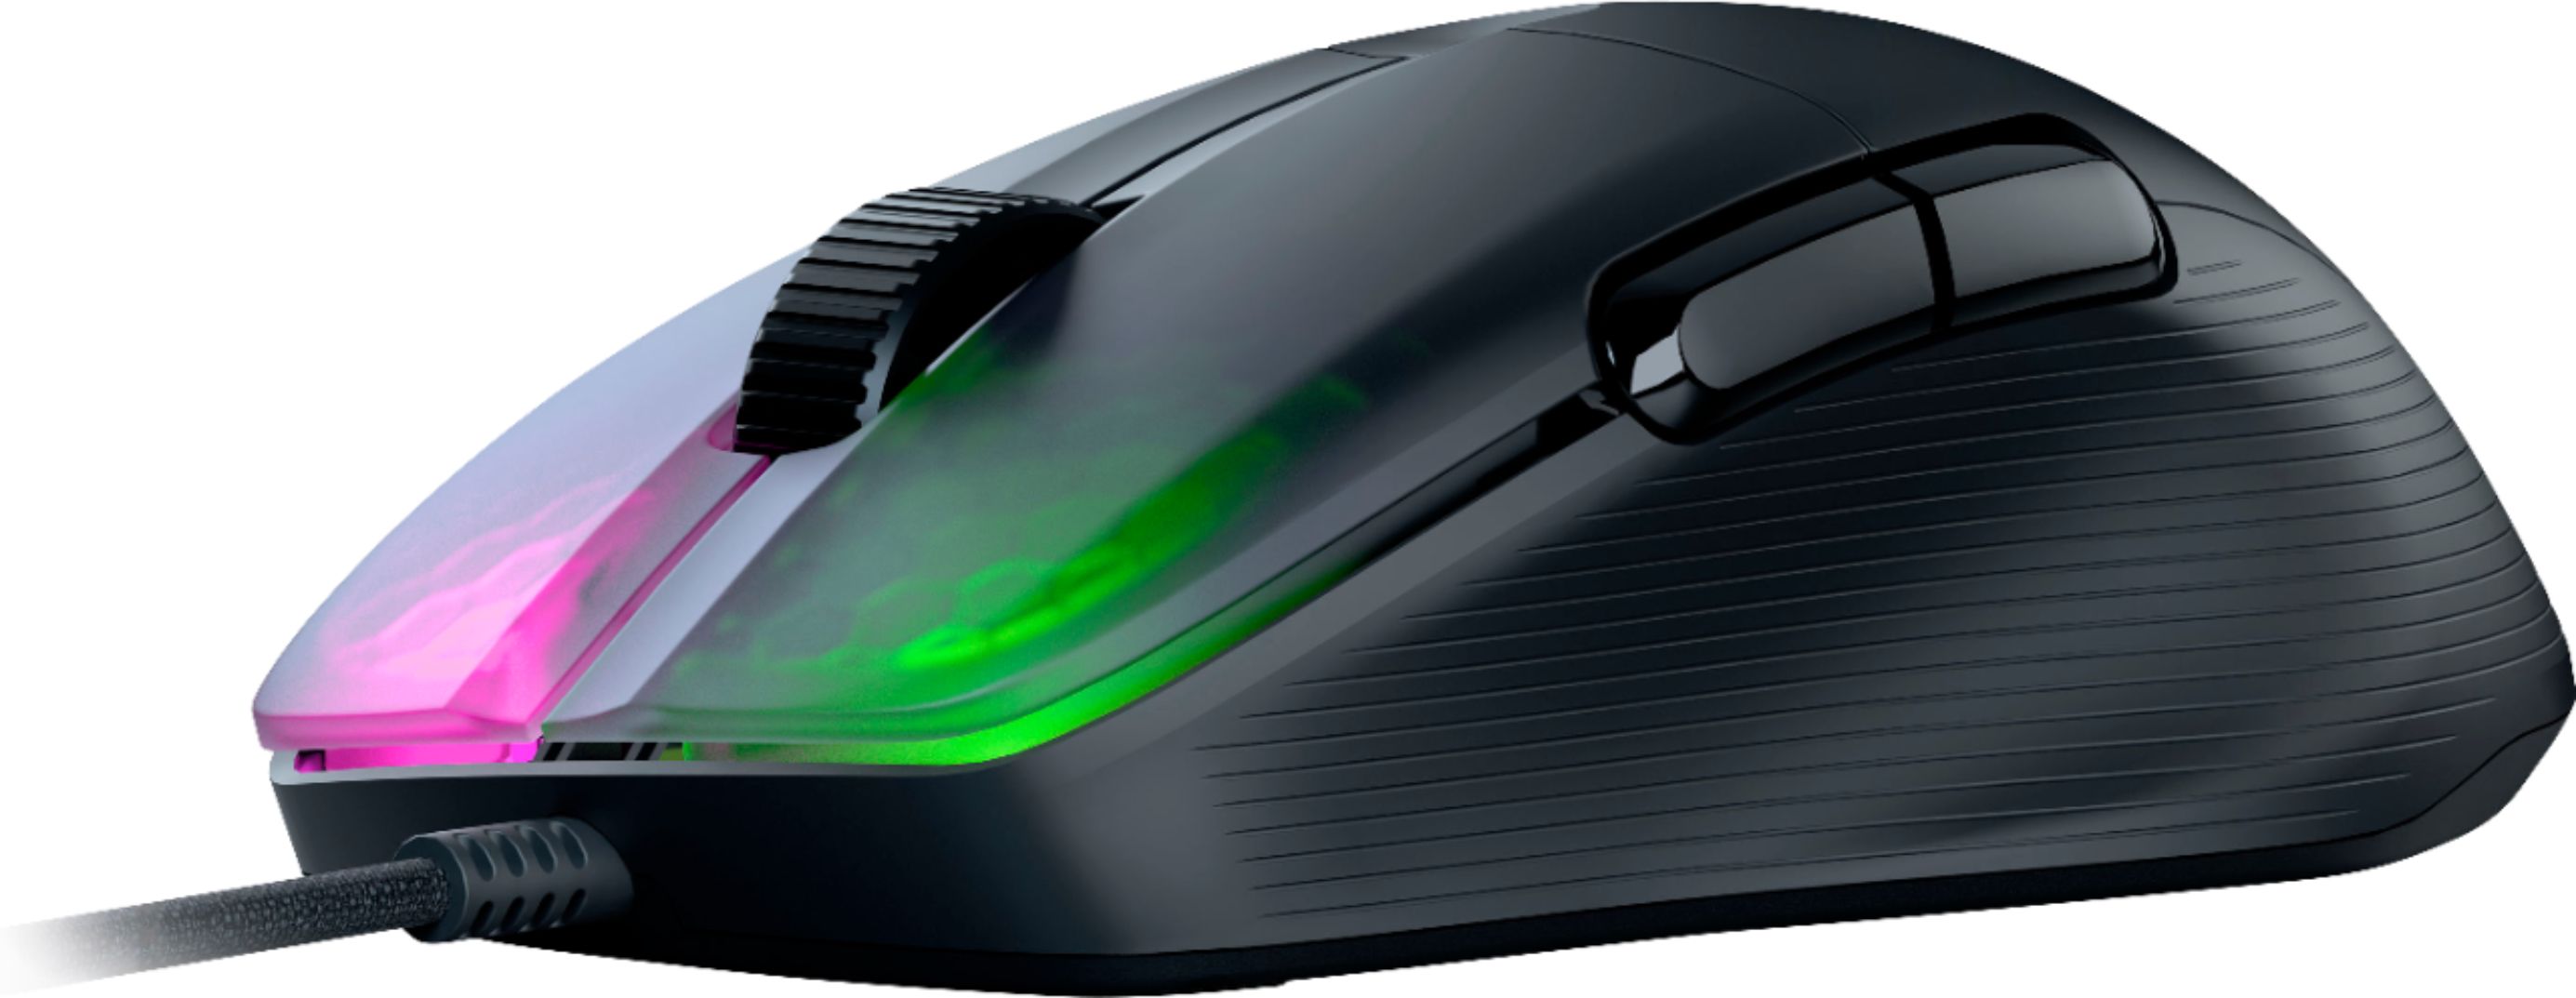 Roccat Kone Pro Wired Ultralight 19k Dpi Optical Gaming Mouse With Rgb Lighting Ash Black Roc 11 400 01 Best Buy - roblox fps mouse